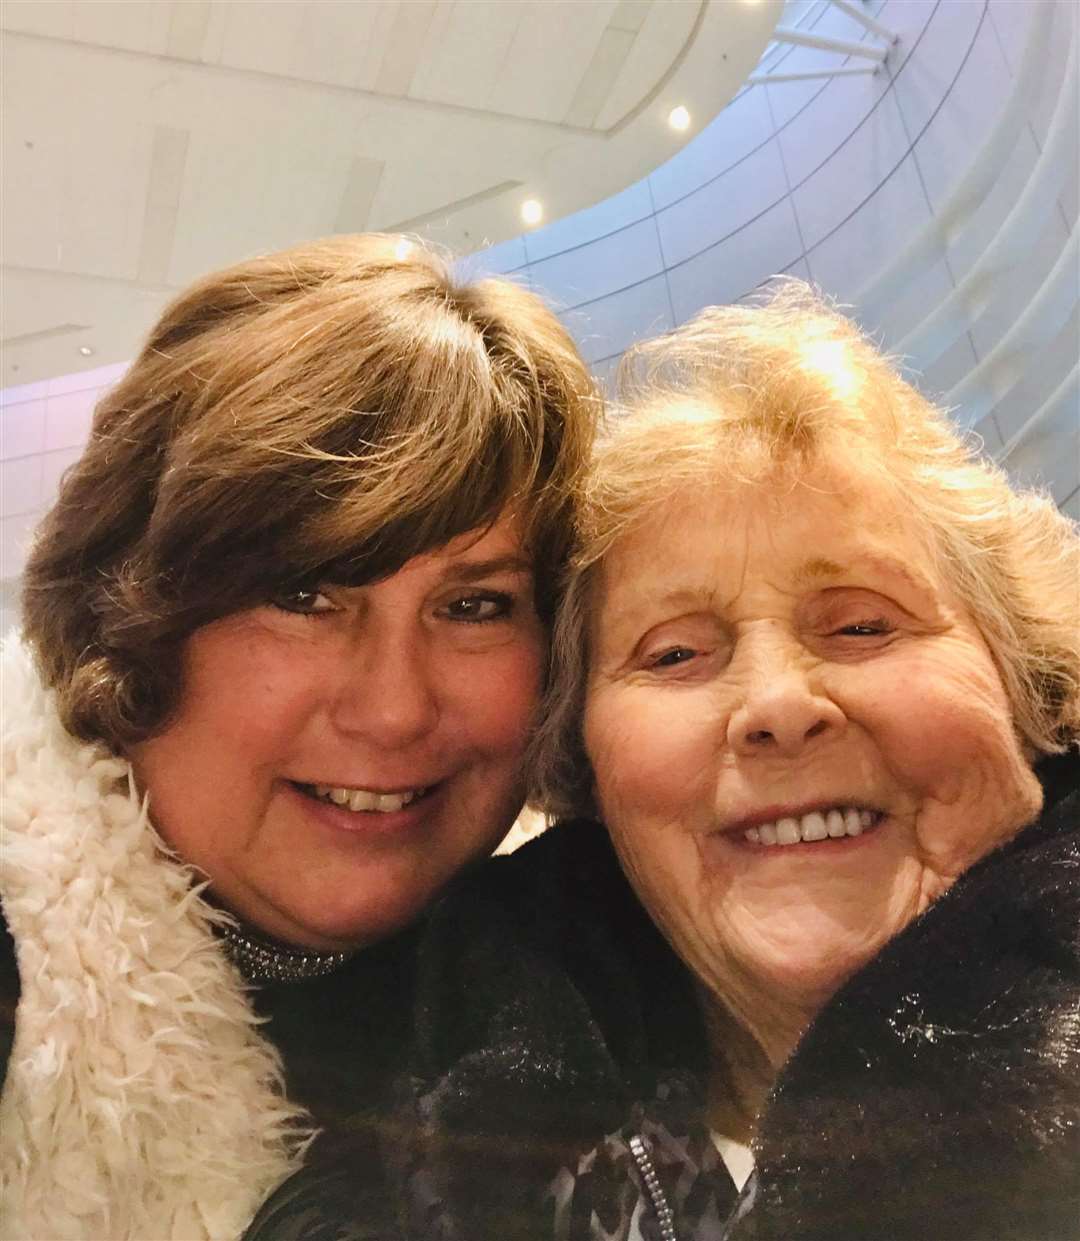 Jane Driscoll, from Sittingbourne, with her mum Rita who she was not been able to see regularly for months during the Covid-19 pandemic